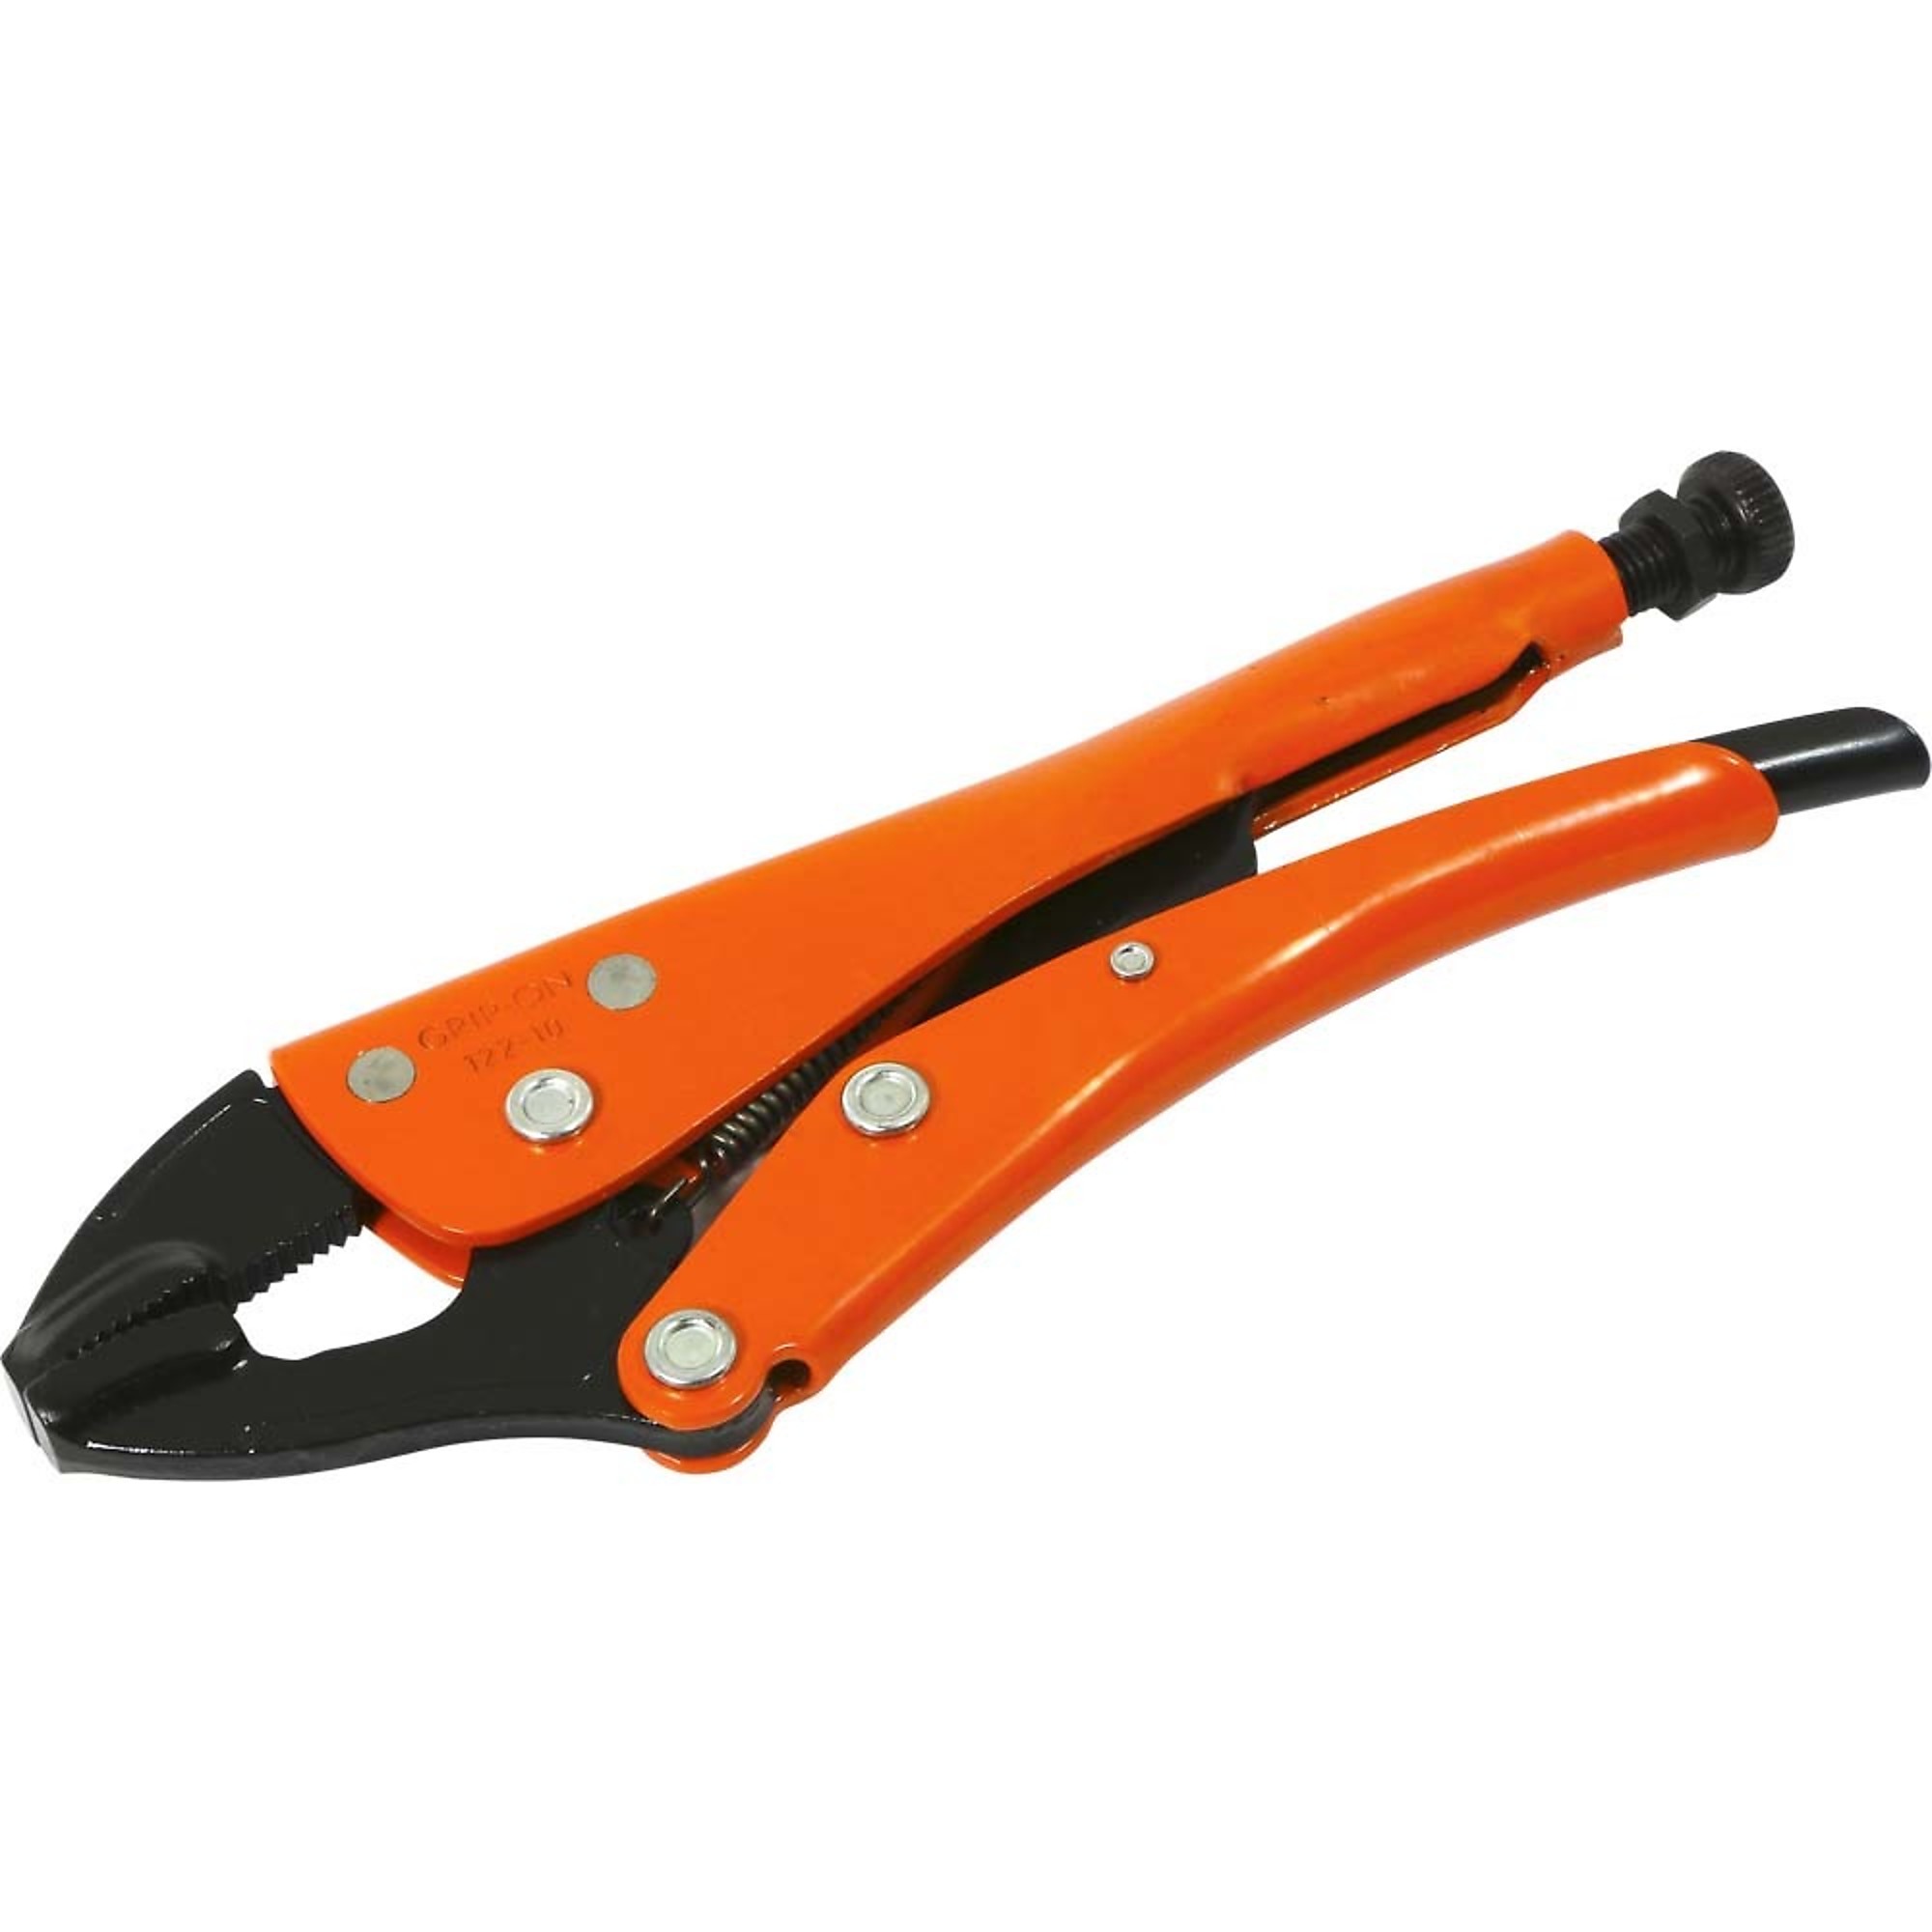 Grip-on, 10Inch Locking Pliers Groovy Grip, Pieces (qty.) 1 Material Alloy Steel, Jaw Capacity 2.44 in, Model 122-10